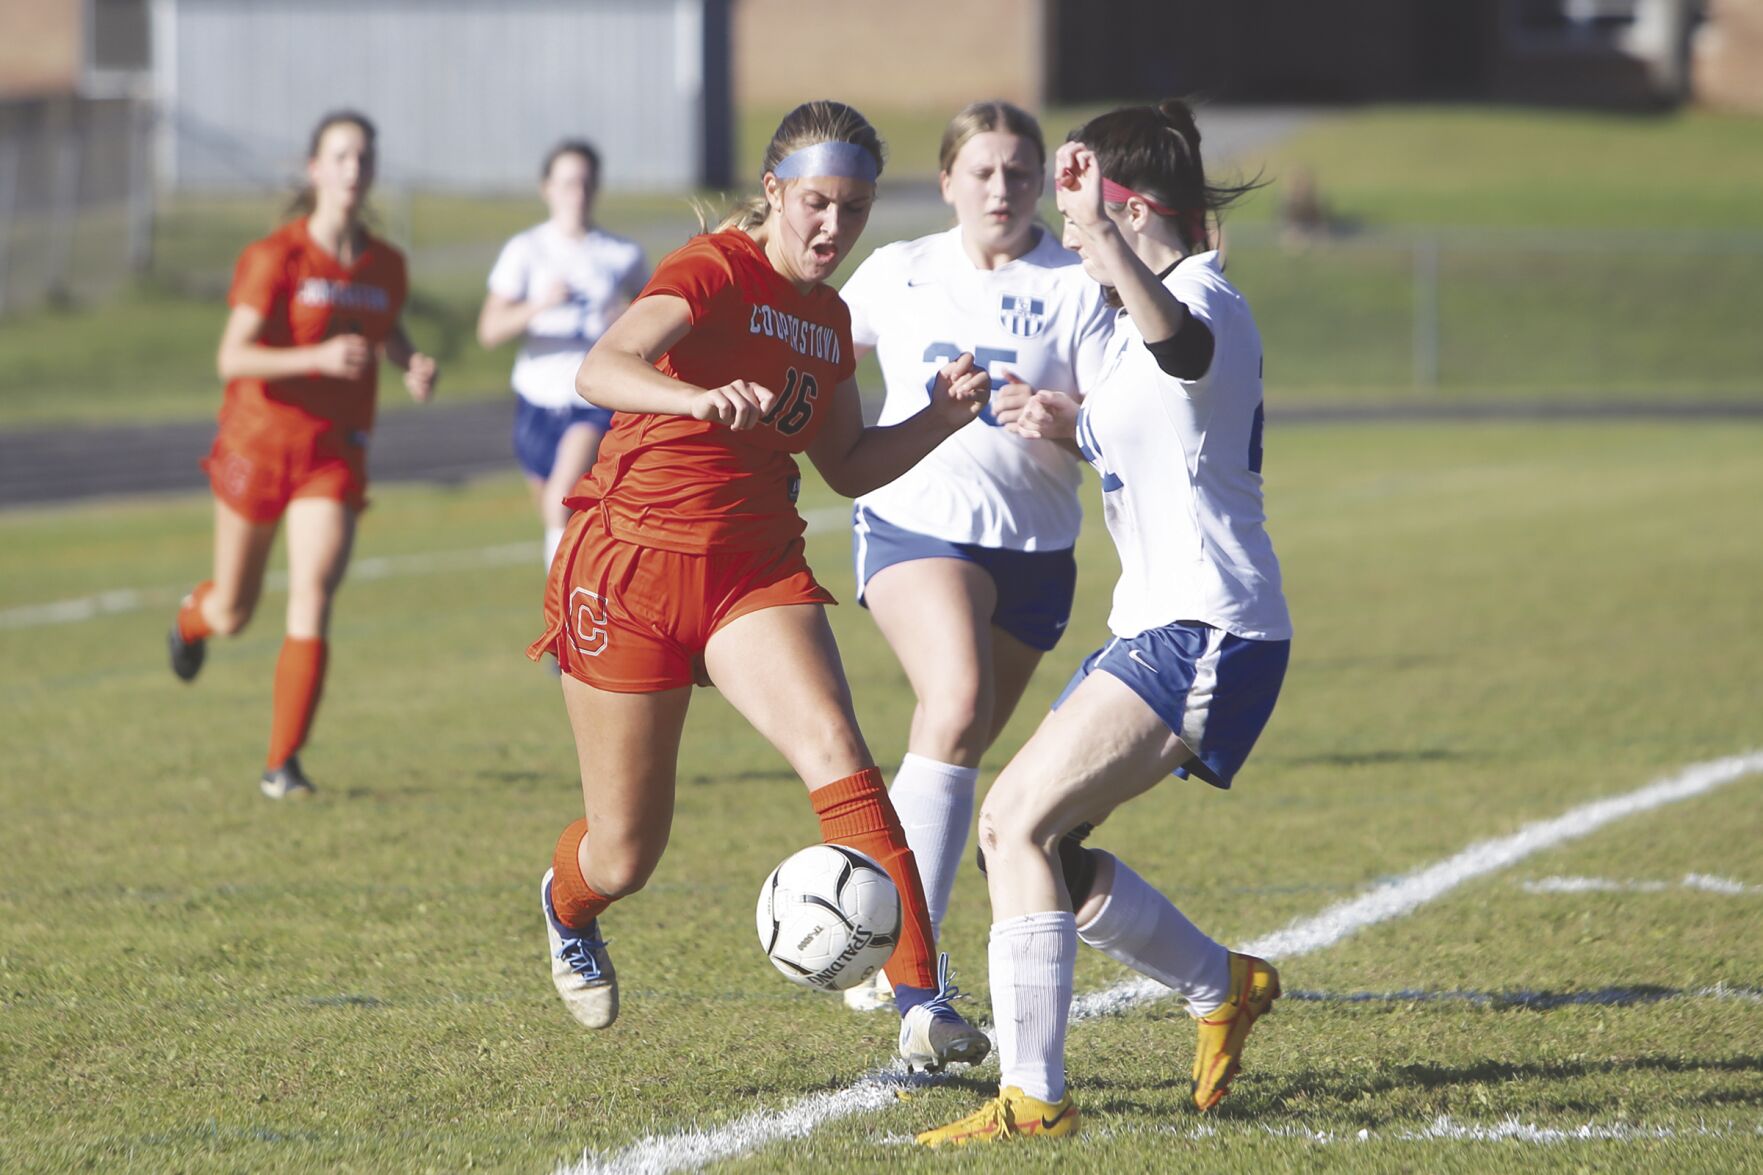 Cooperstown Girls Soccer Team Rallies to Secure 2-1 Victory Against Sandy Creek